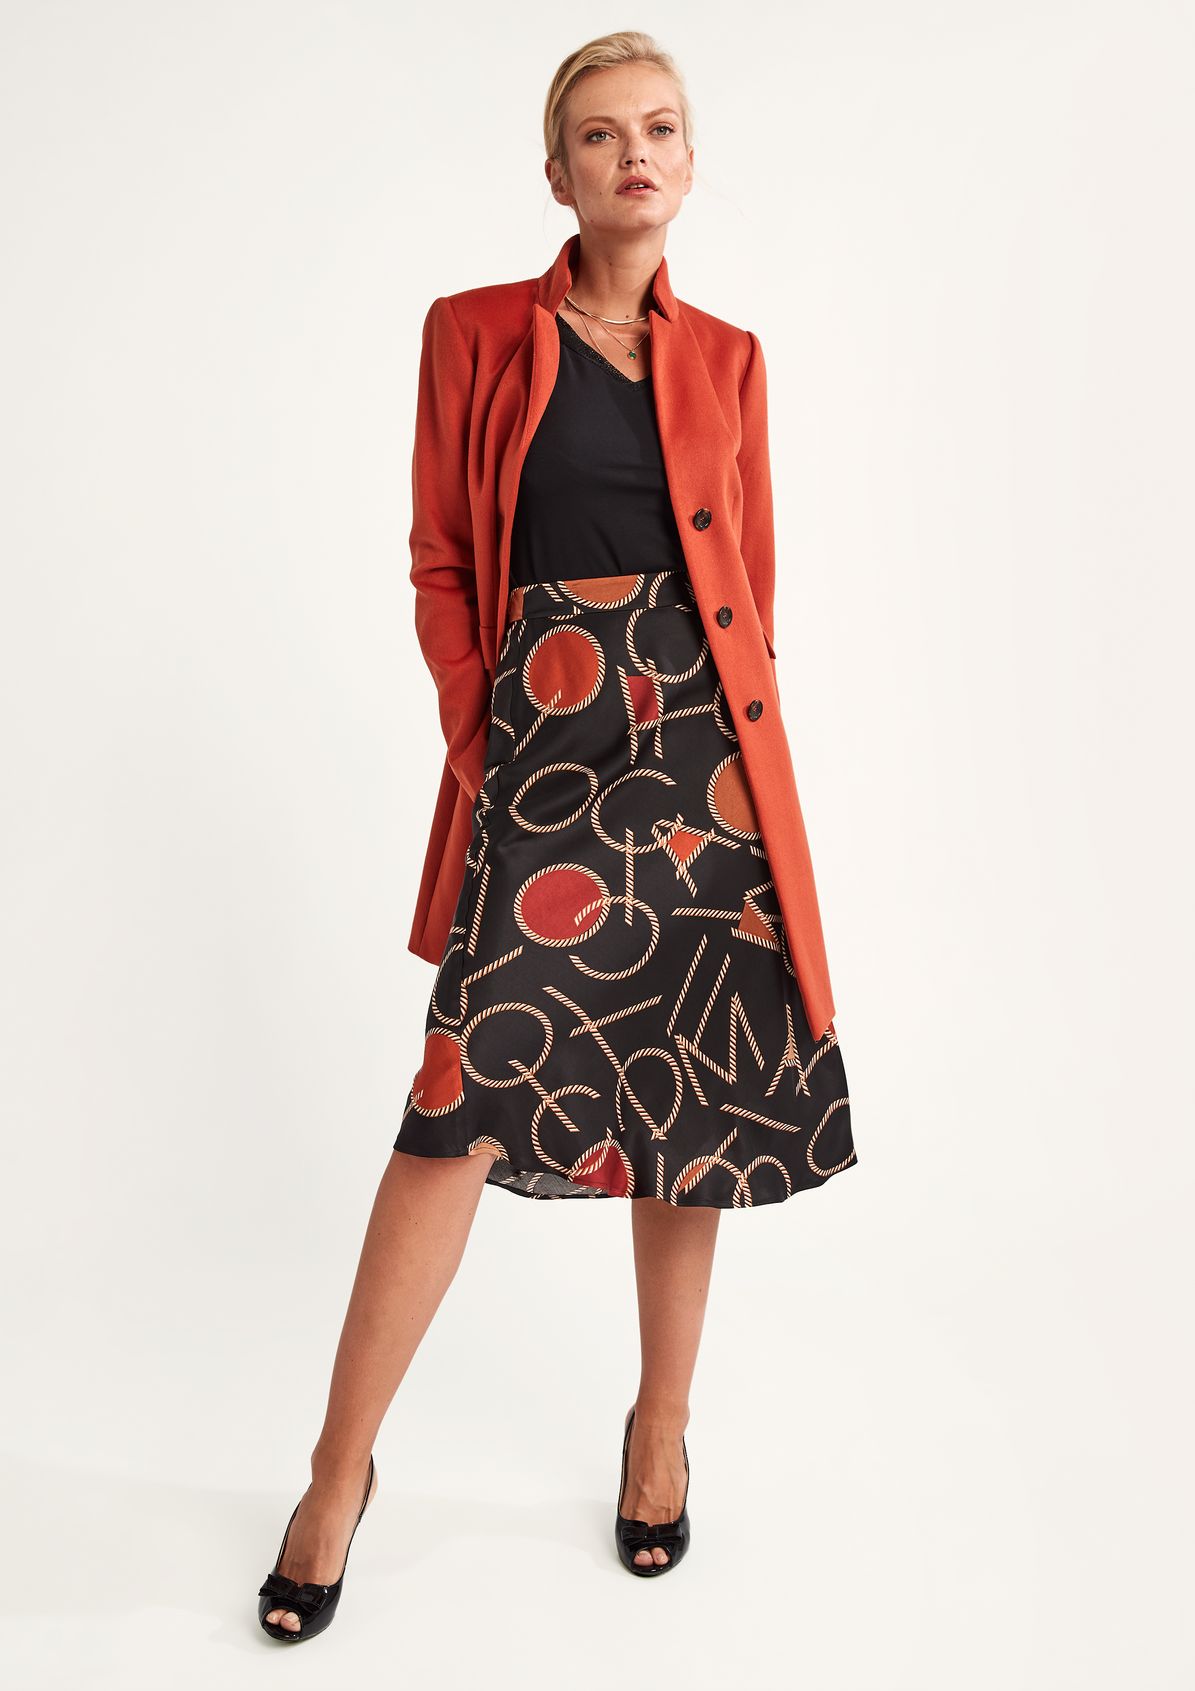 Viscose skirt with an all-over pattern from comma